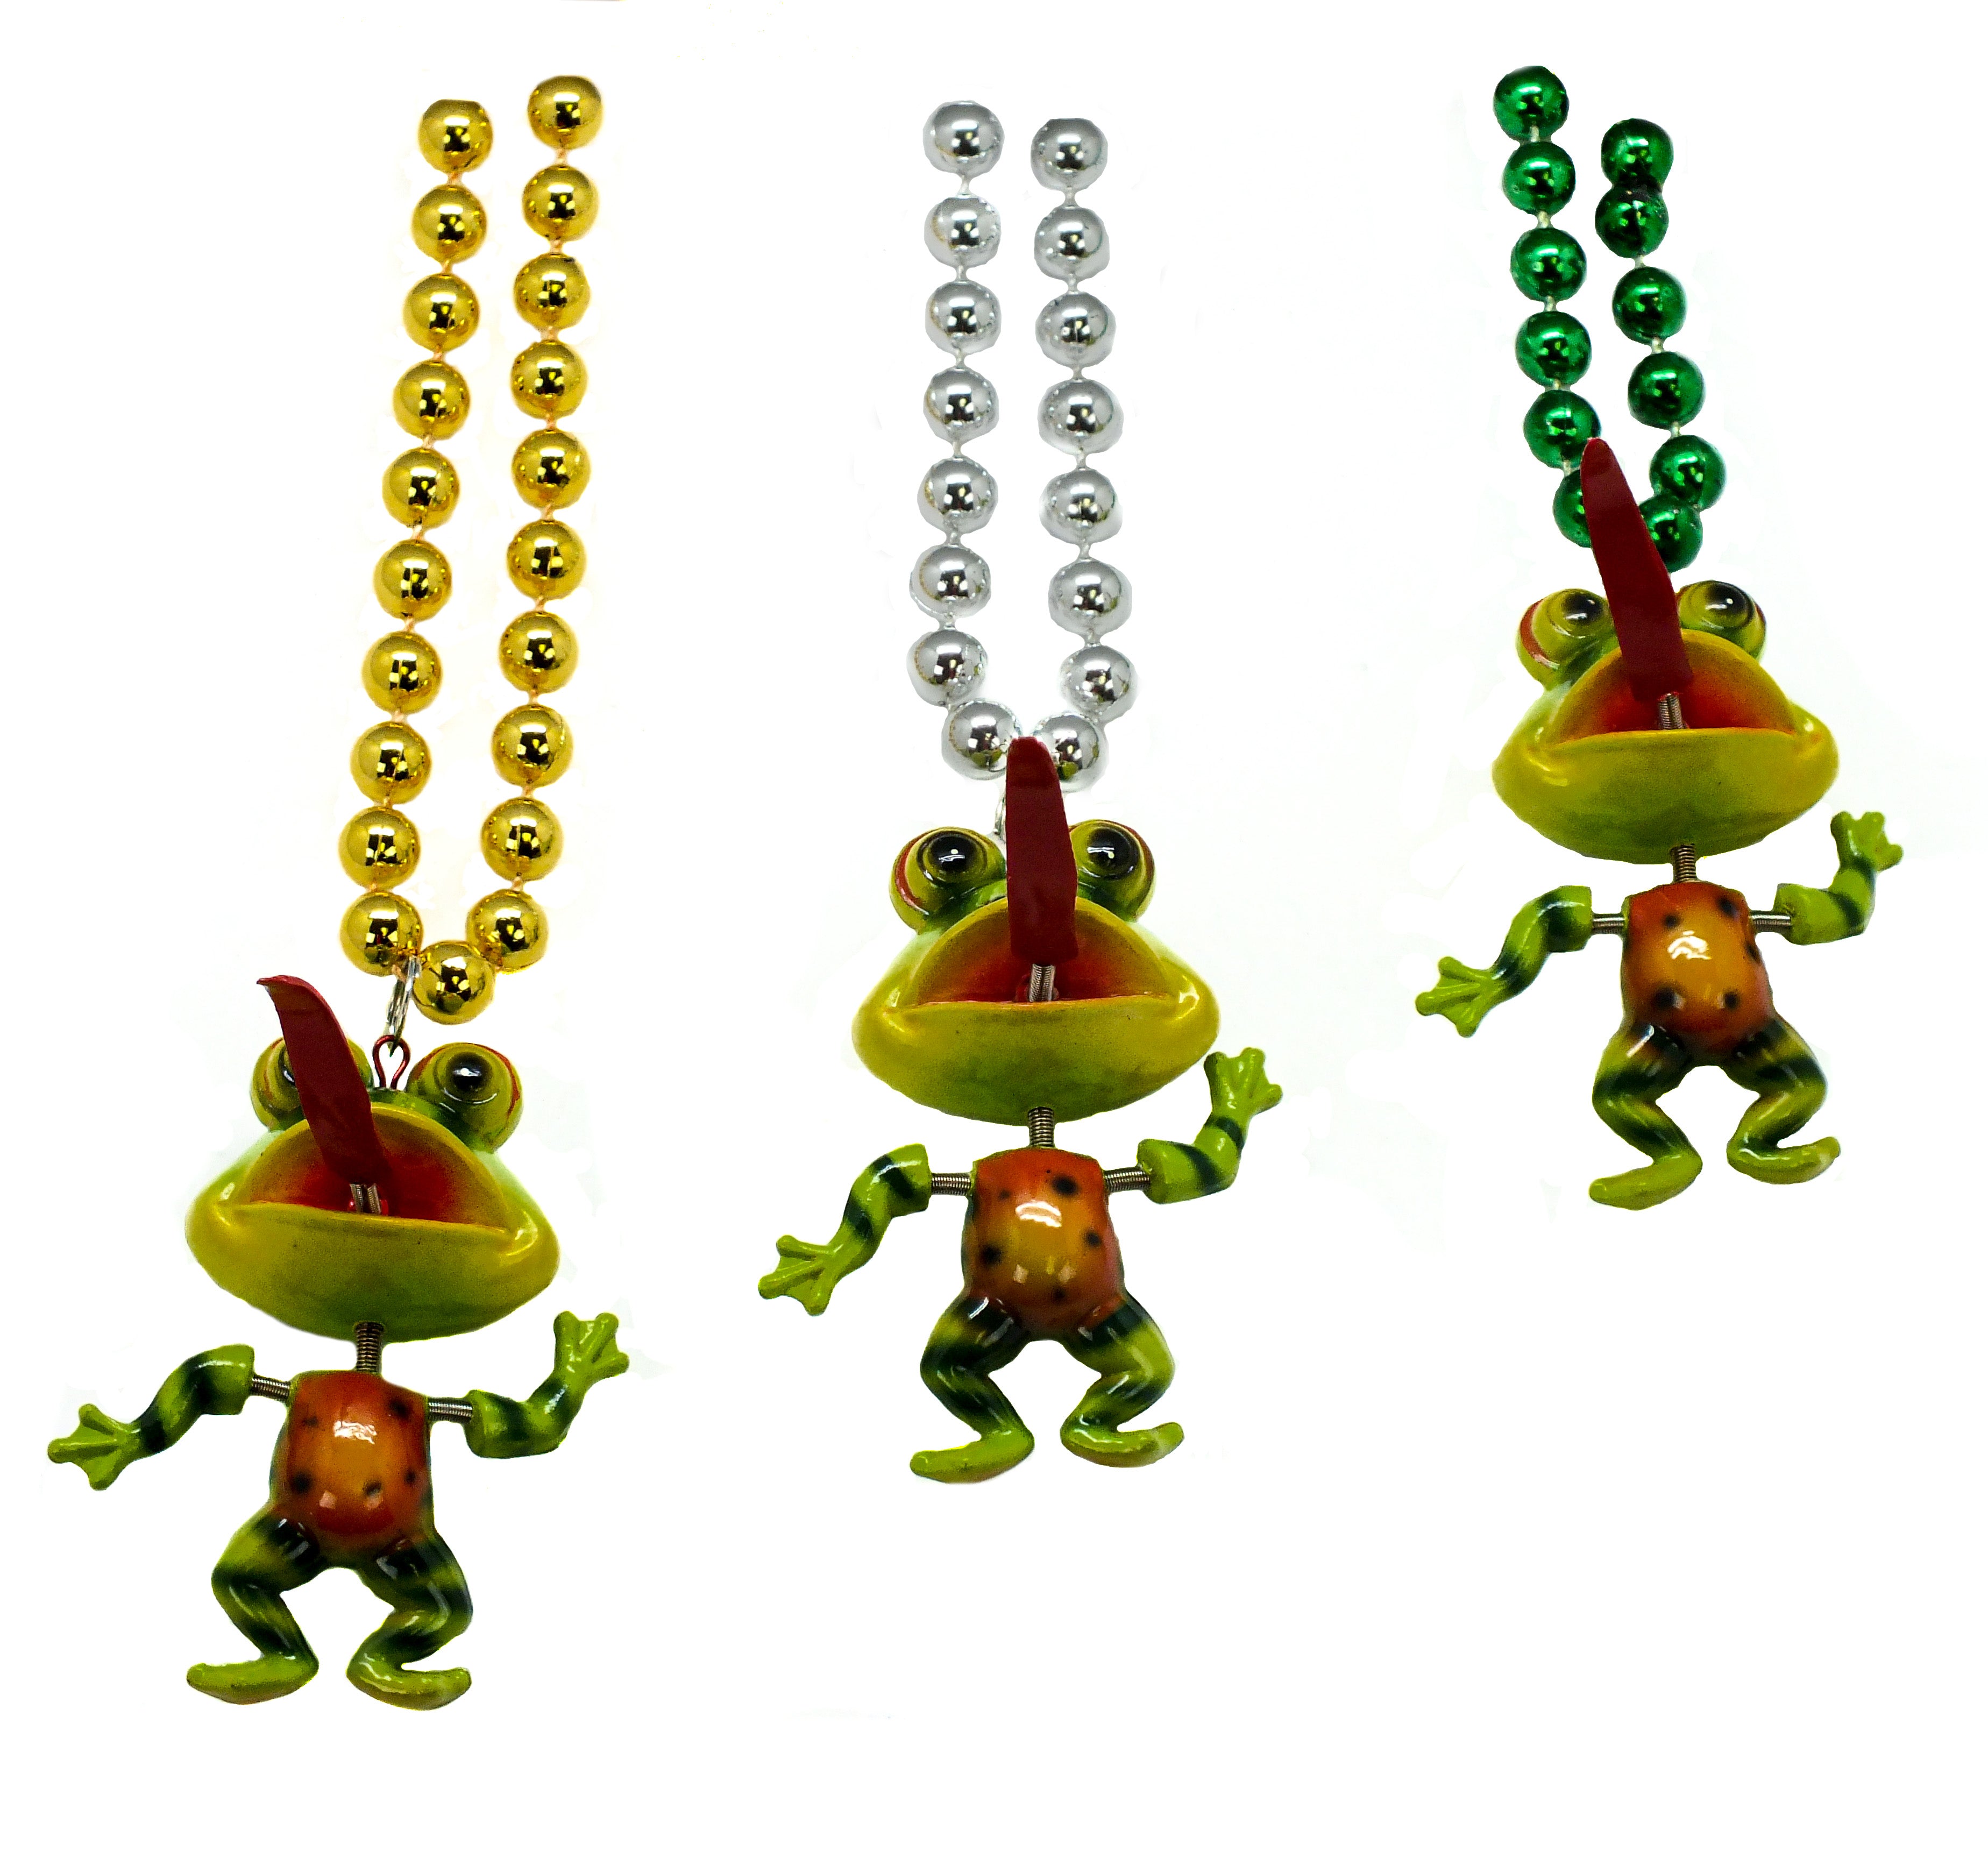 PGG Plush Frogs- Plush Items, Mardi Gras Beads from Beads by the Dozen